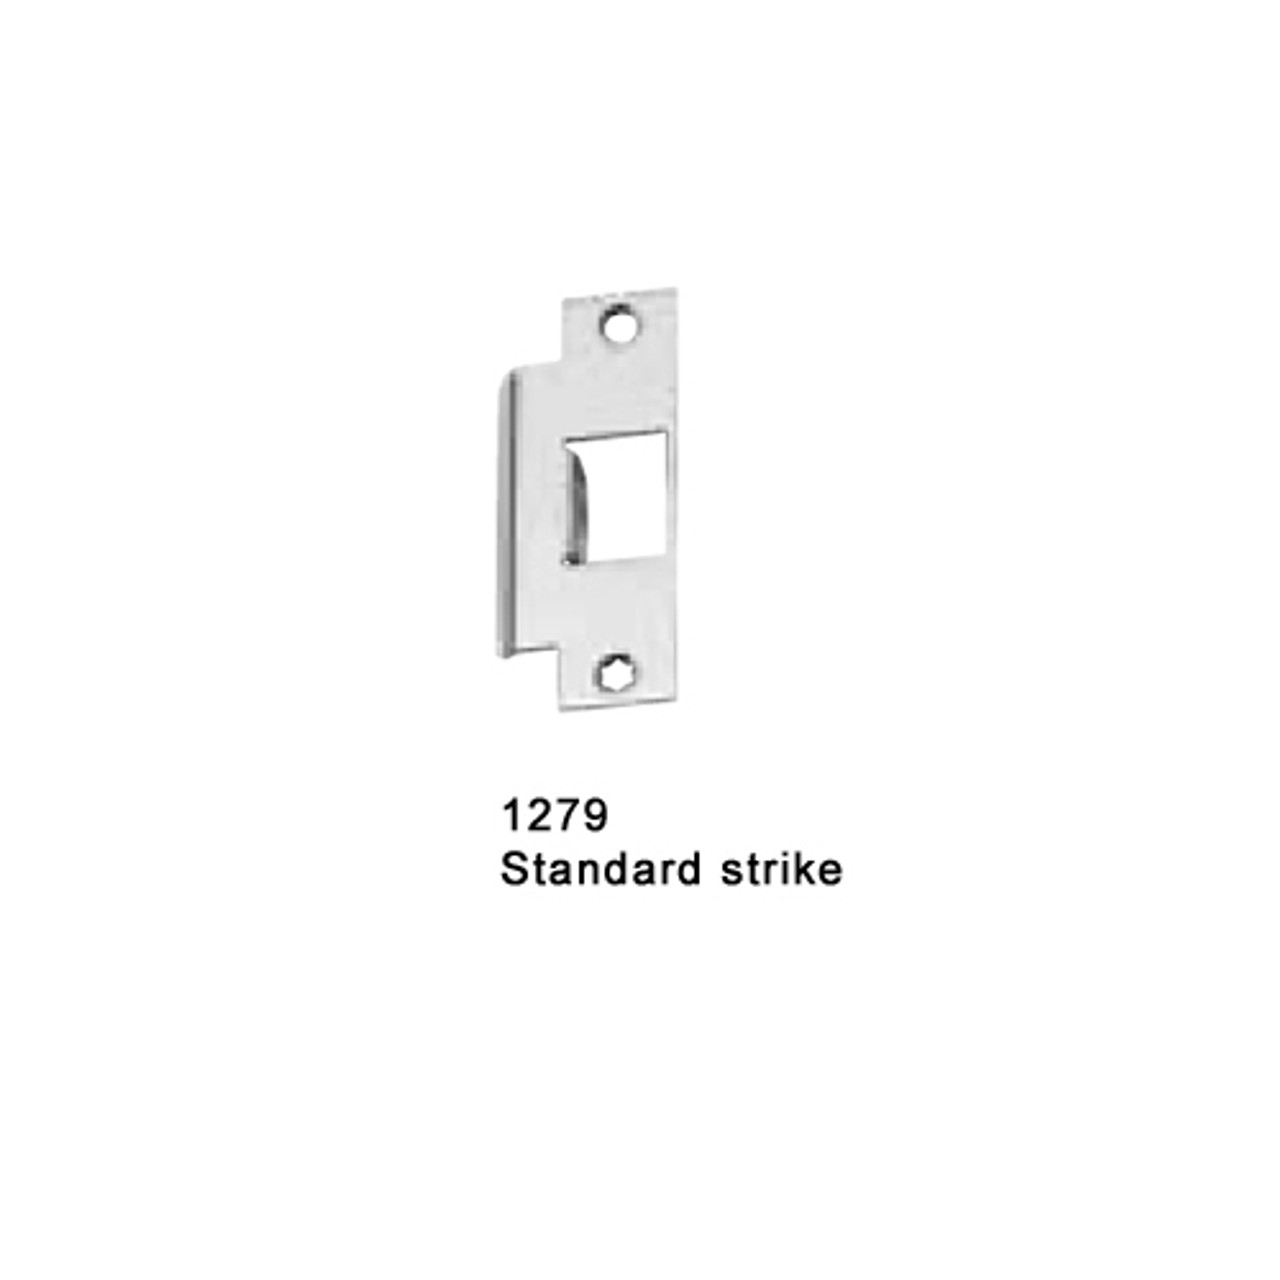 F-25-M-L-DT-Dane-US15-3-LHR Falcon 25 Series Fire Rated Mortise Lock Devices 510L-DT Dane Lever Trim with Dummy Trim in Satin Nickel